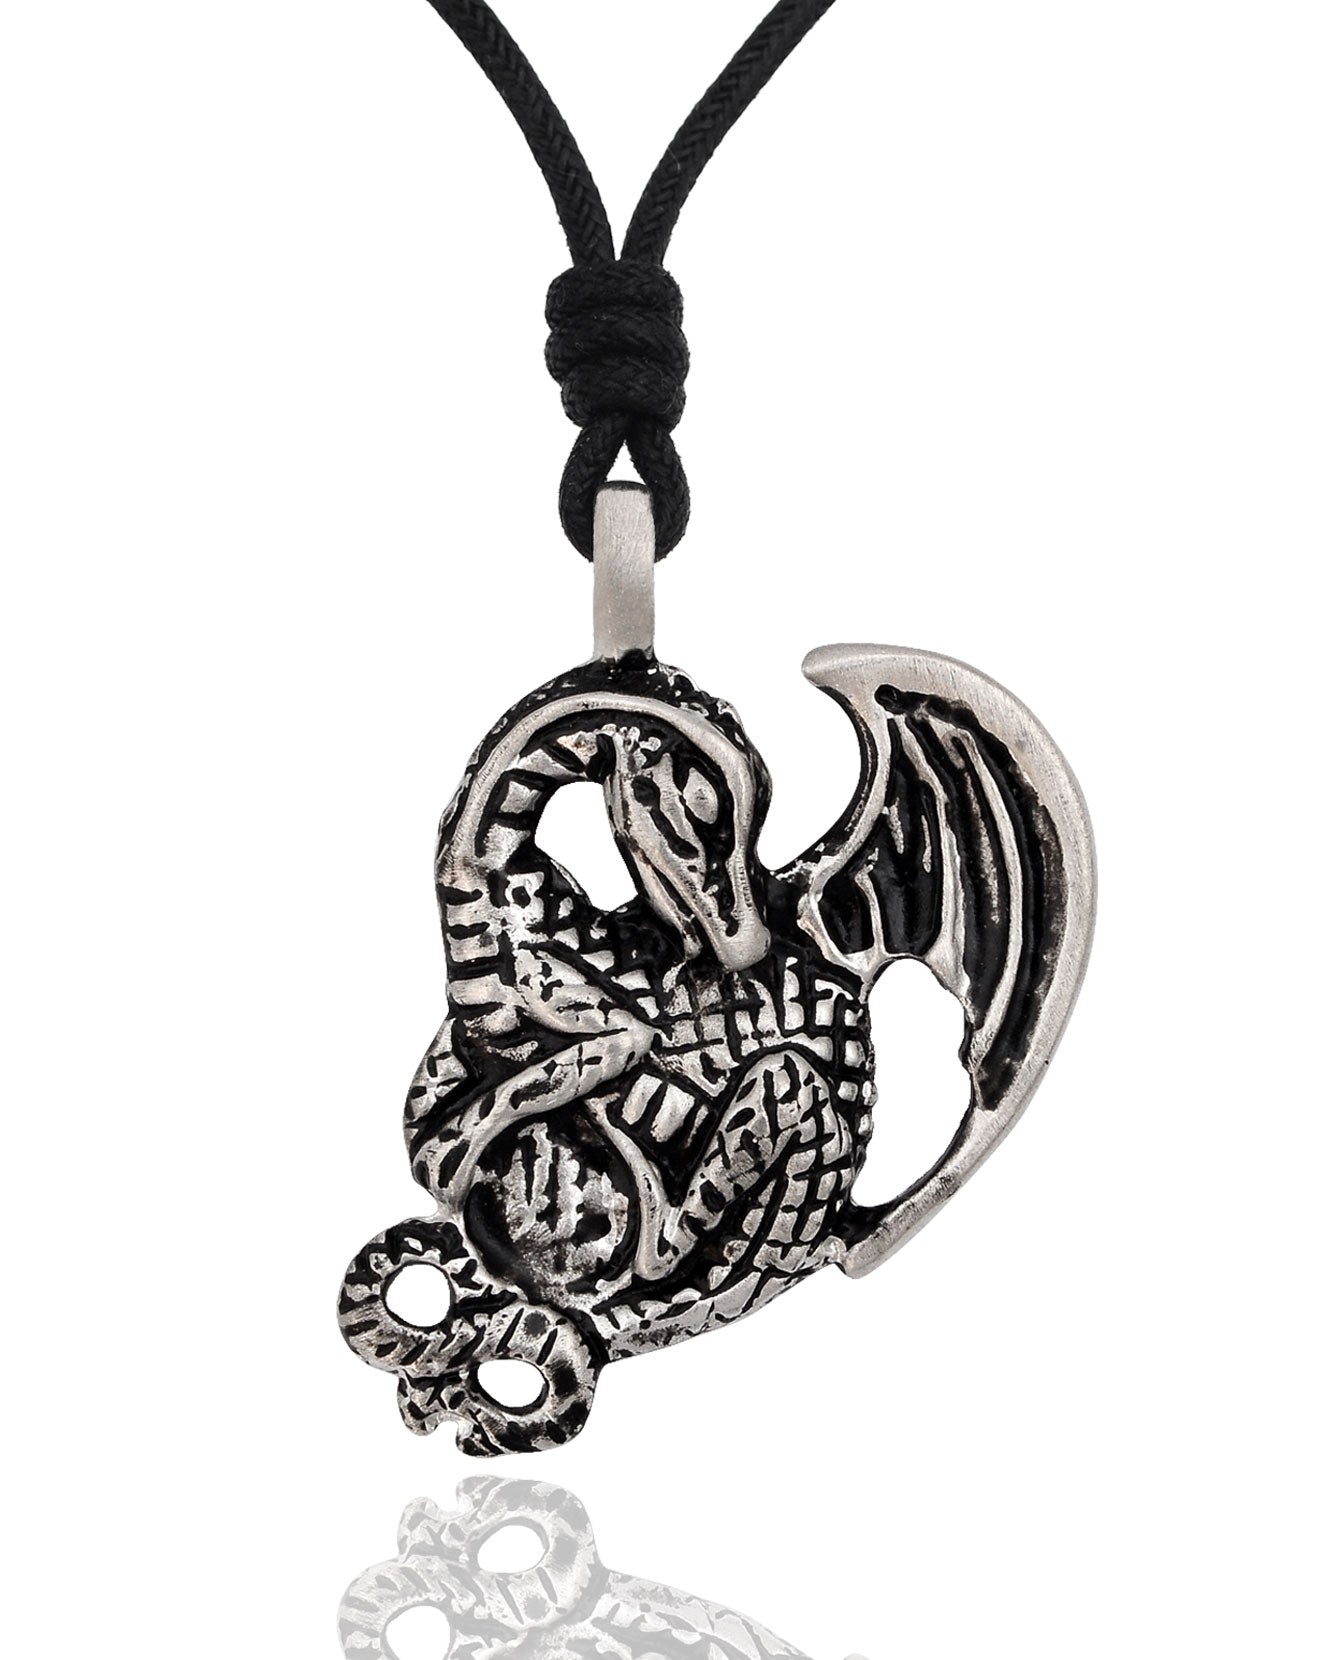 New Fire Dragon Silver Pewter Charm Necklace Pendant Jewelry